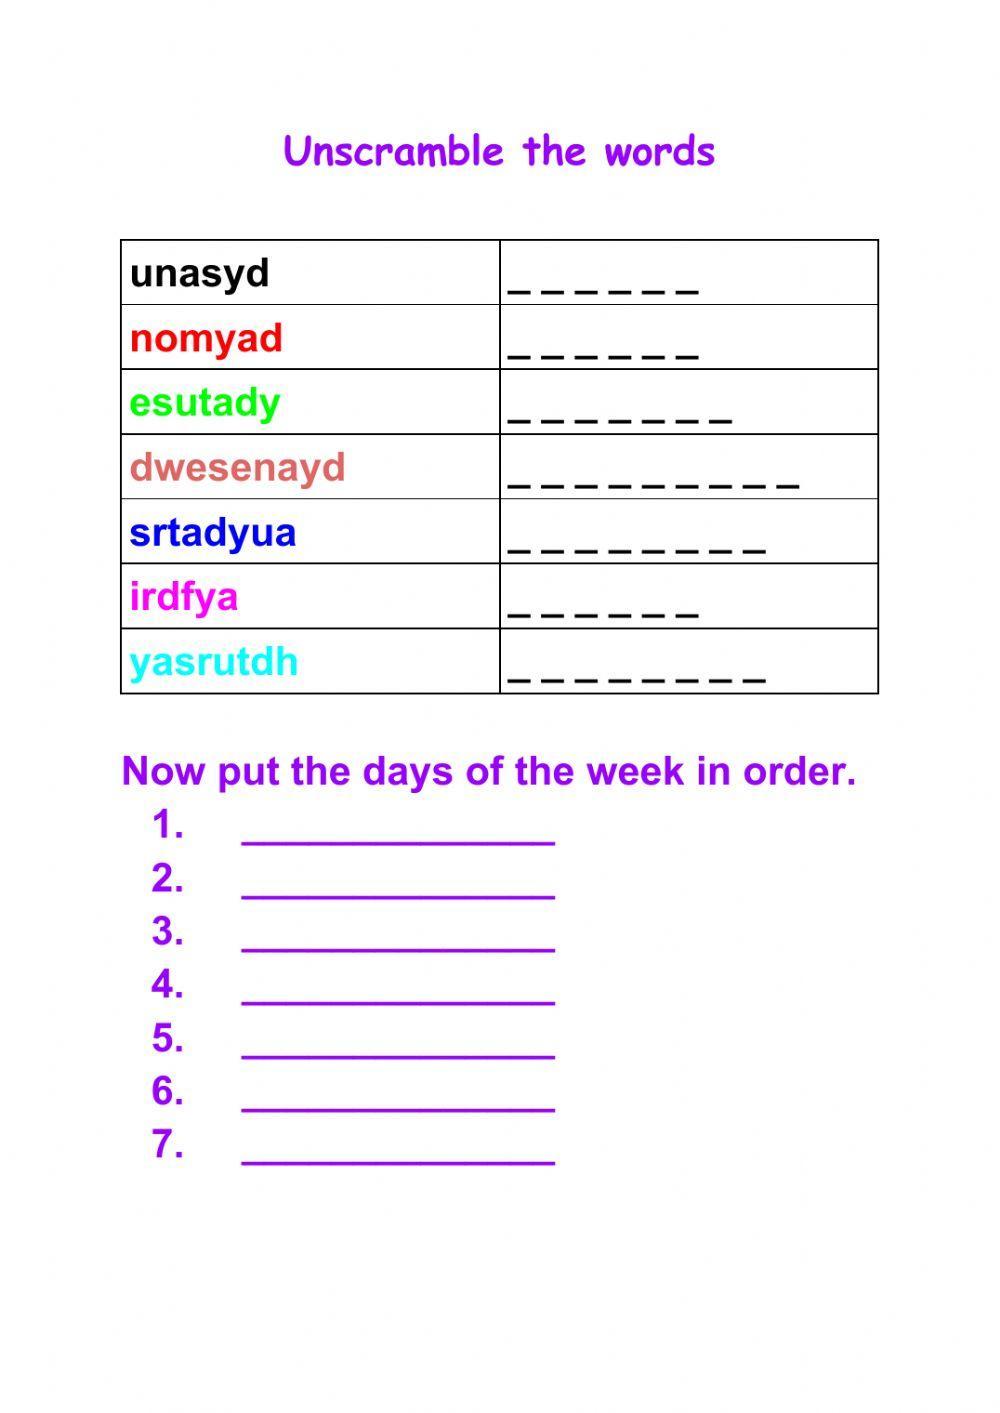 Unscramble the days of the week